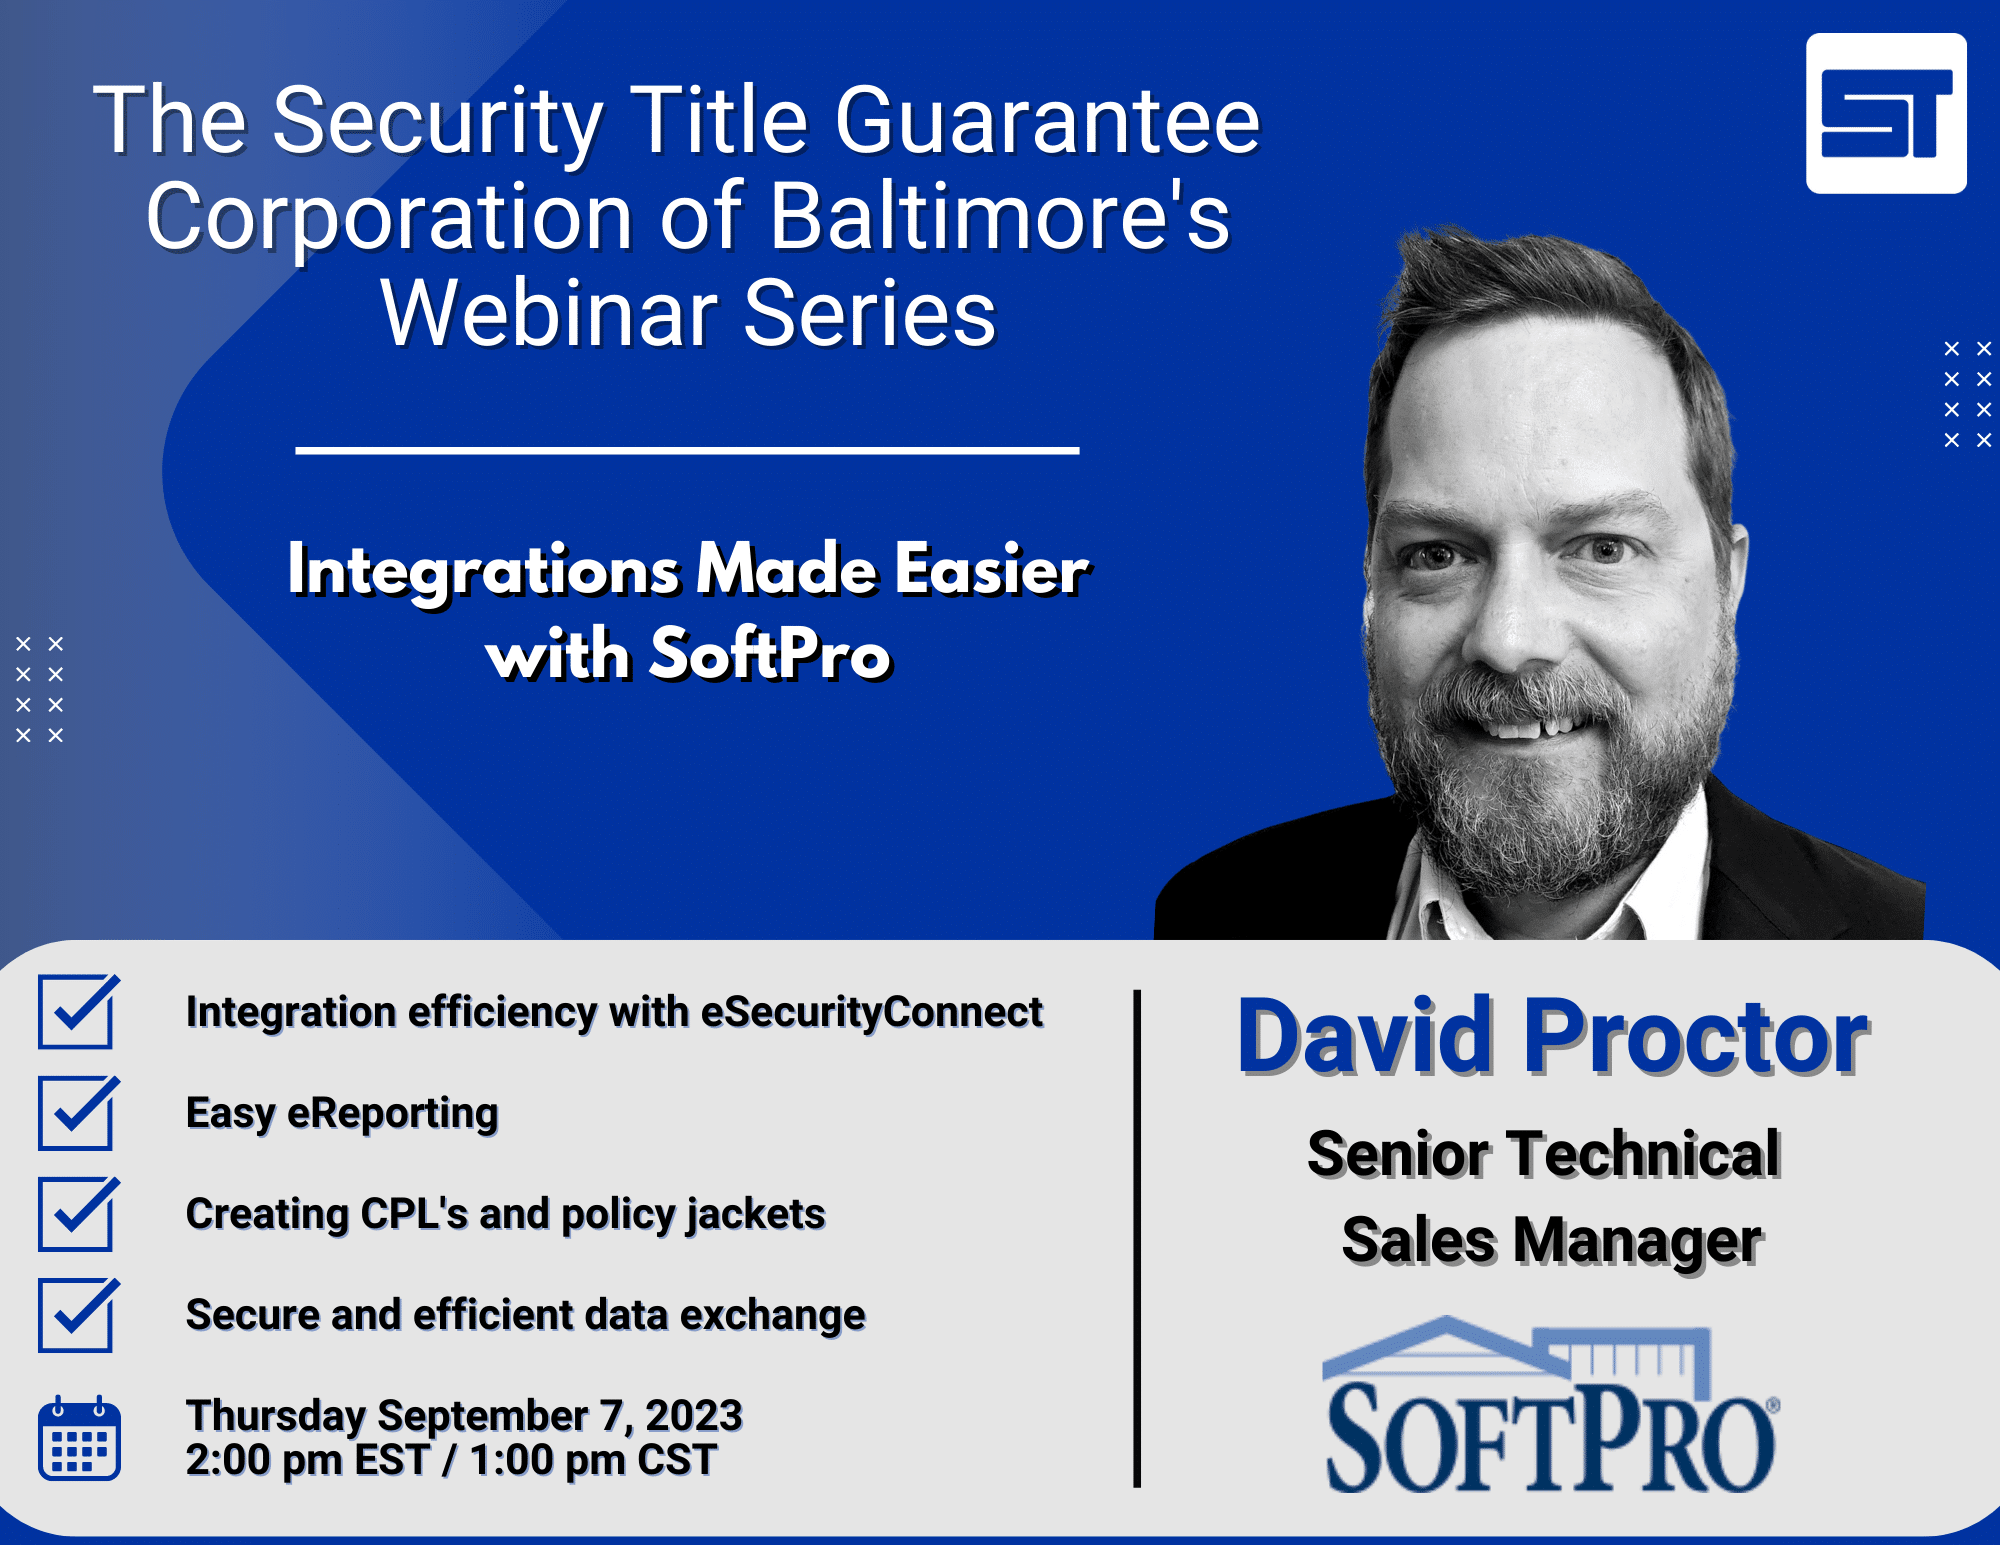 This is a webinar about the title insurance software integration between SoftPro and eSecurityConnect.